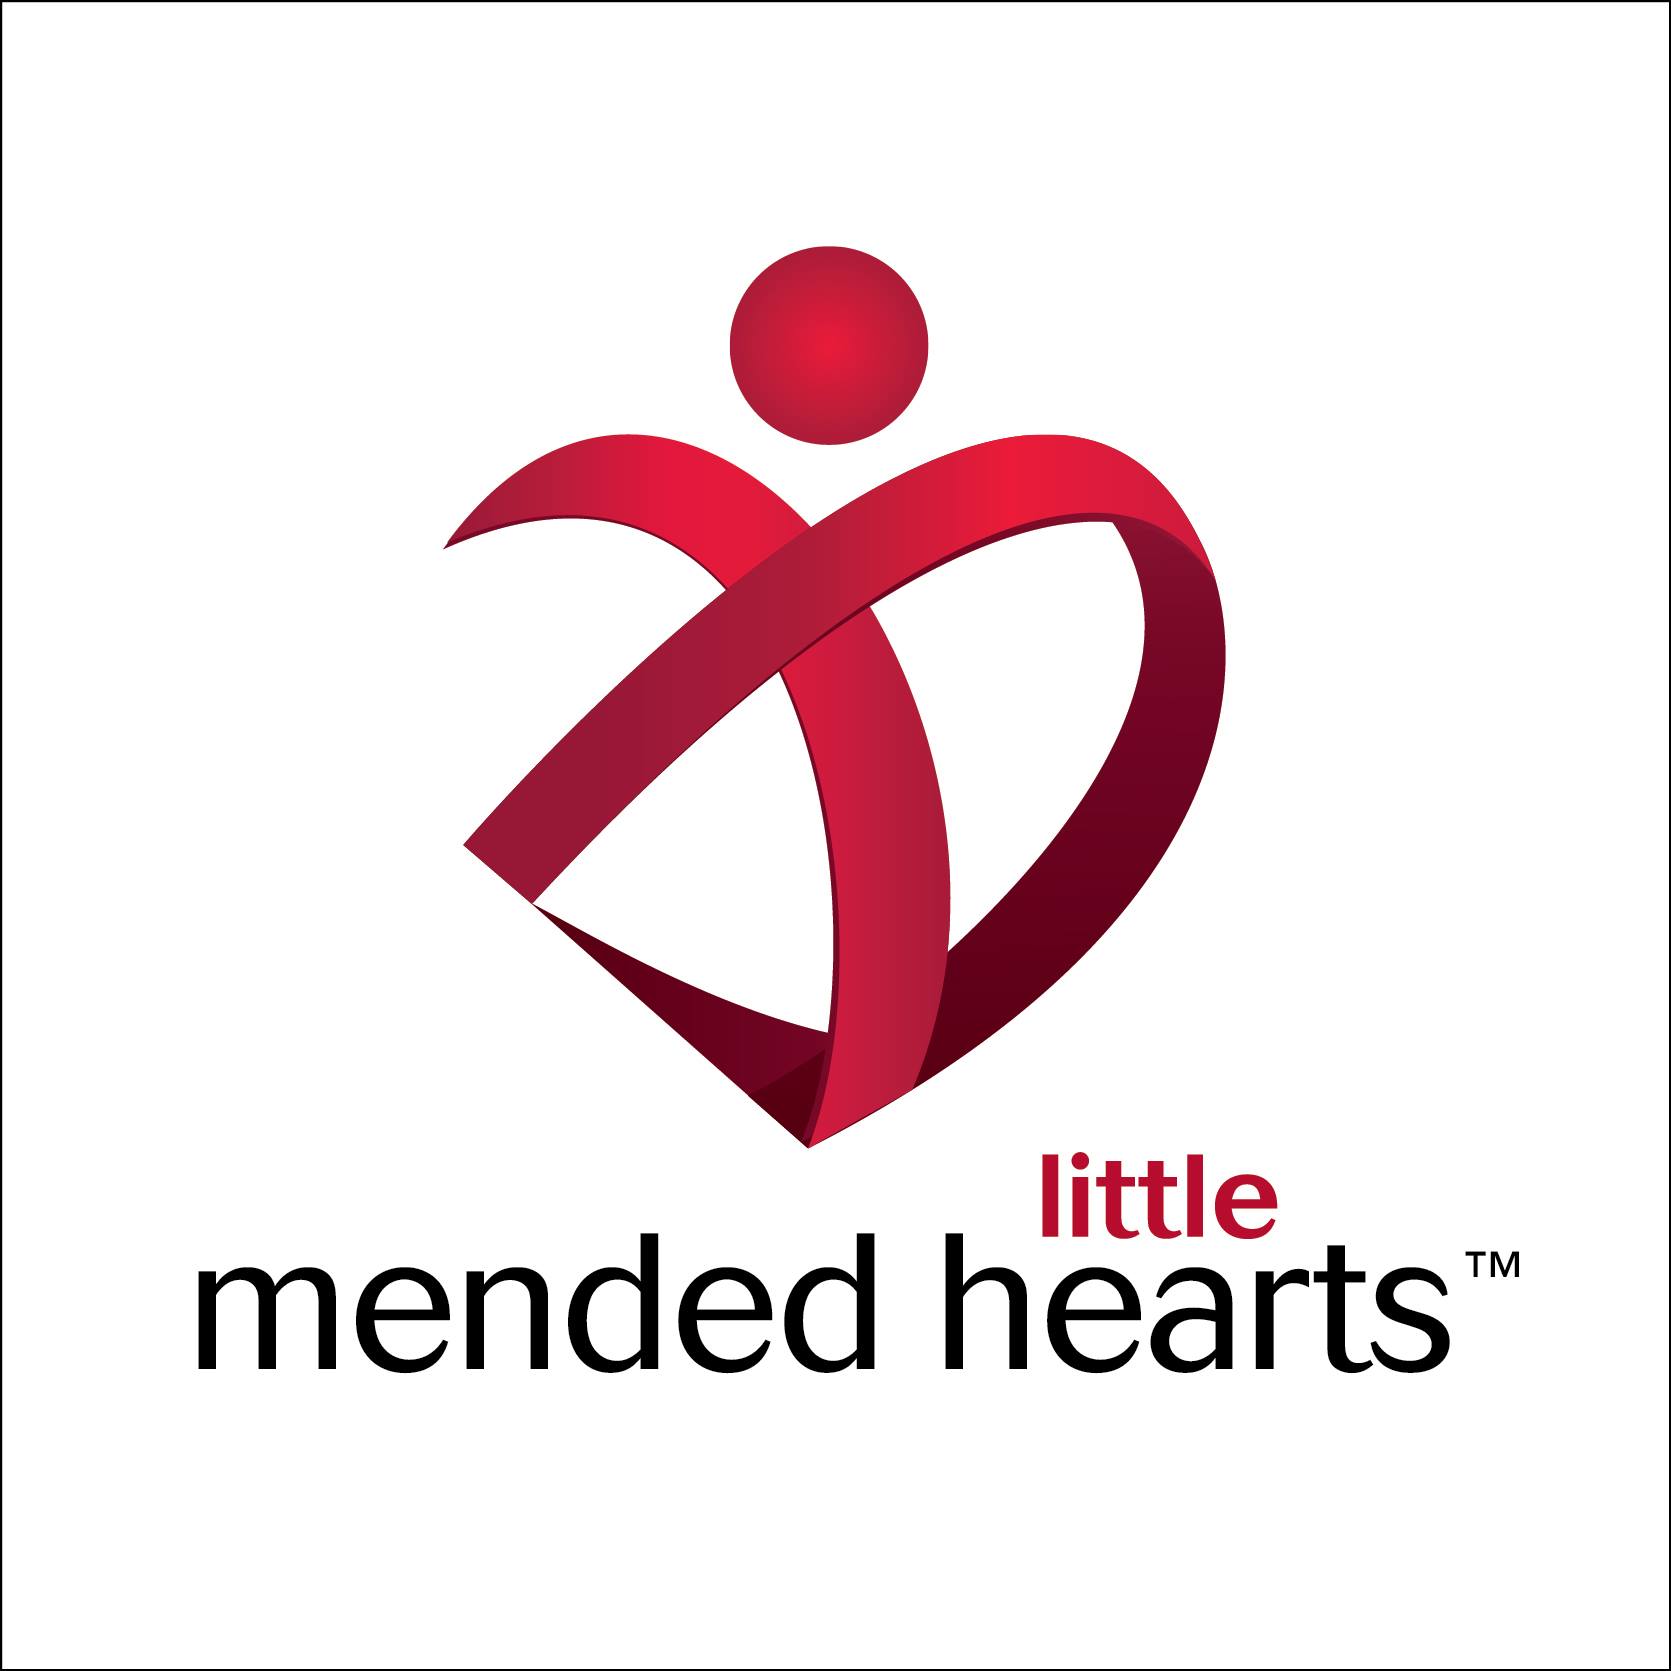 Mended Little Hearts #30DaysOfCaring Day 19